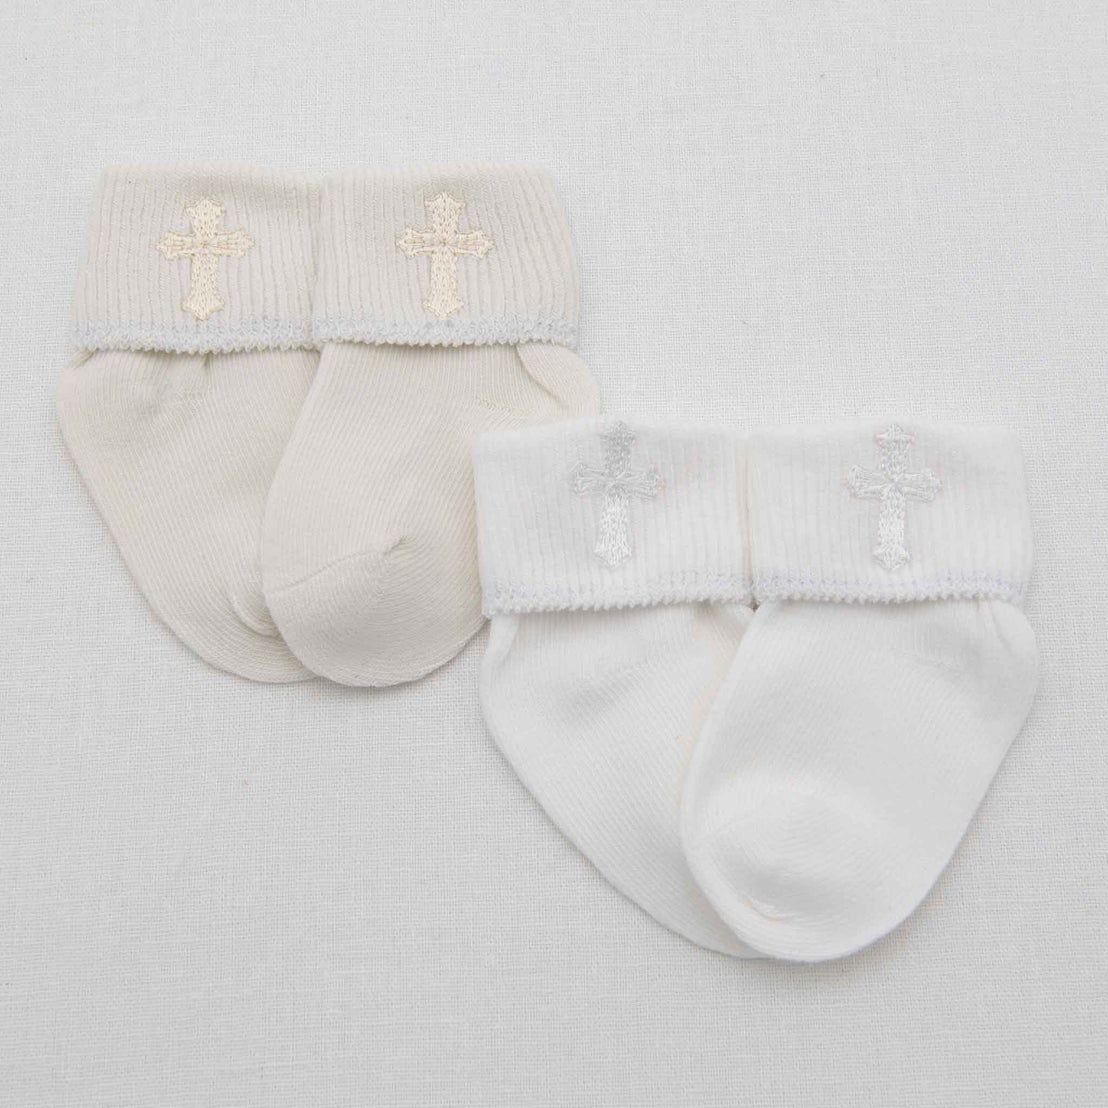 A pair of white Cross Socks with decorative lace and an embroidered cross, displayed on a plain light background.